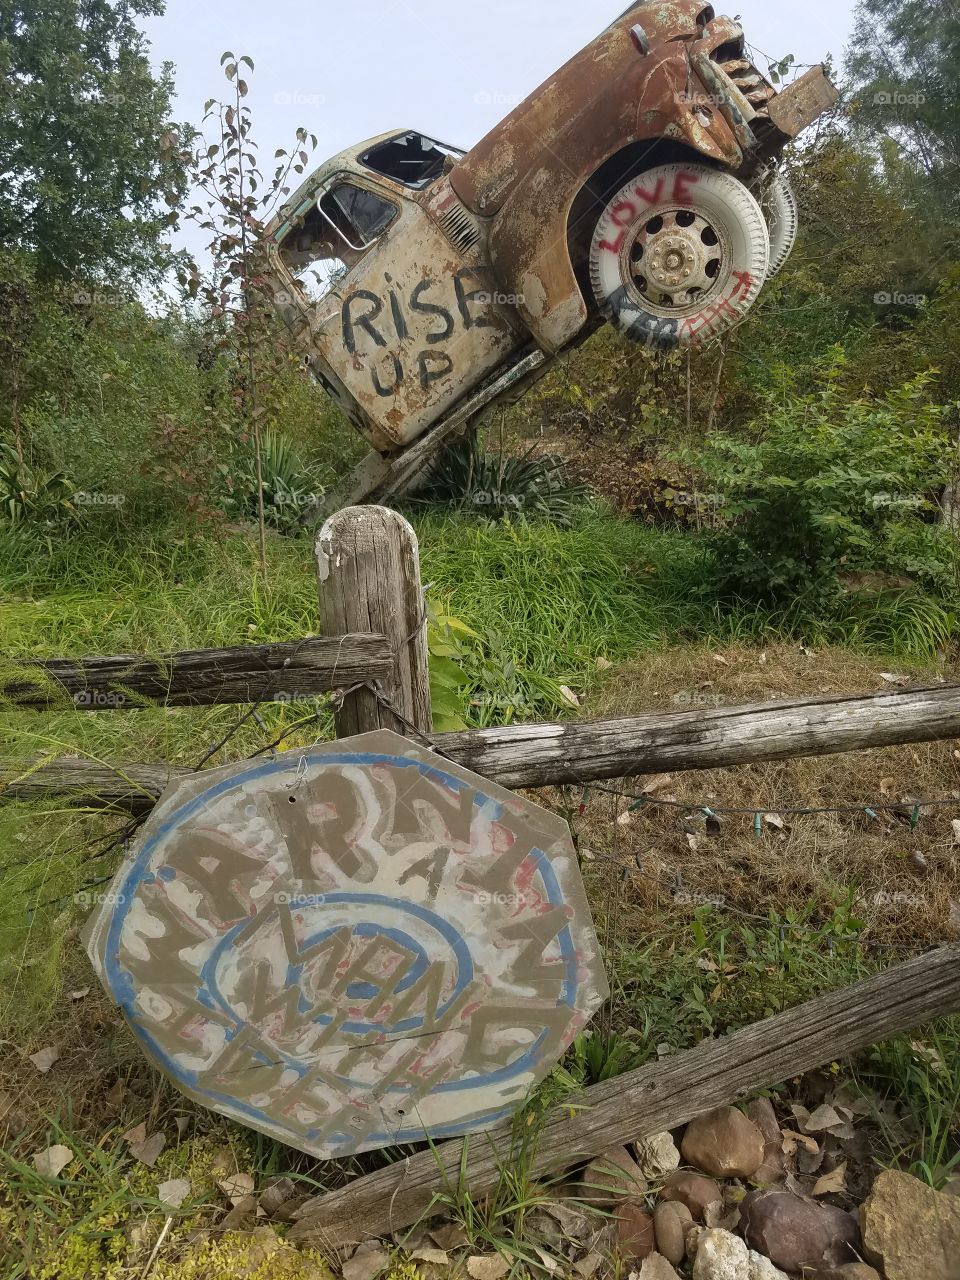 Erected truck at truckhenge that reads "RISE UP". Below is a sign saying "WARNIMG S MAN WITH IDEAS".